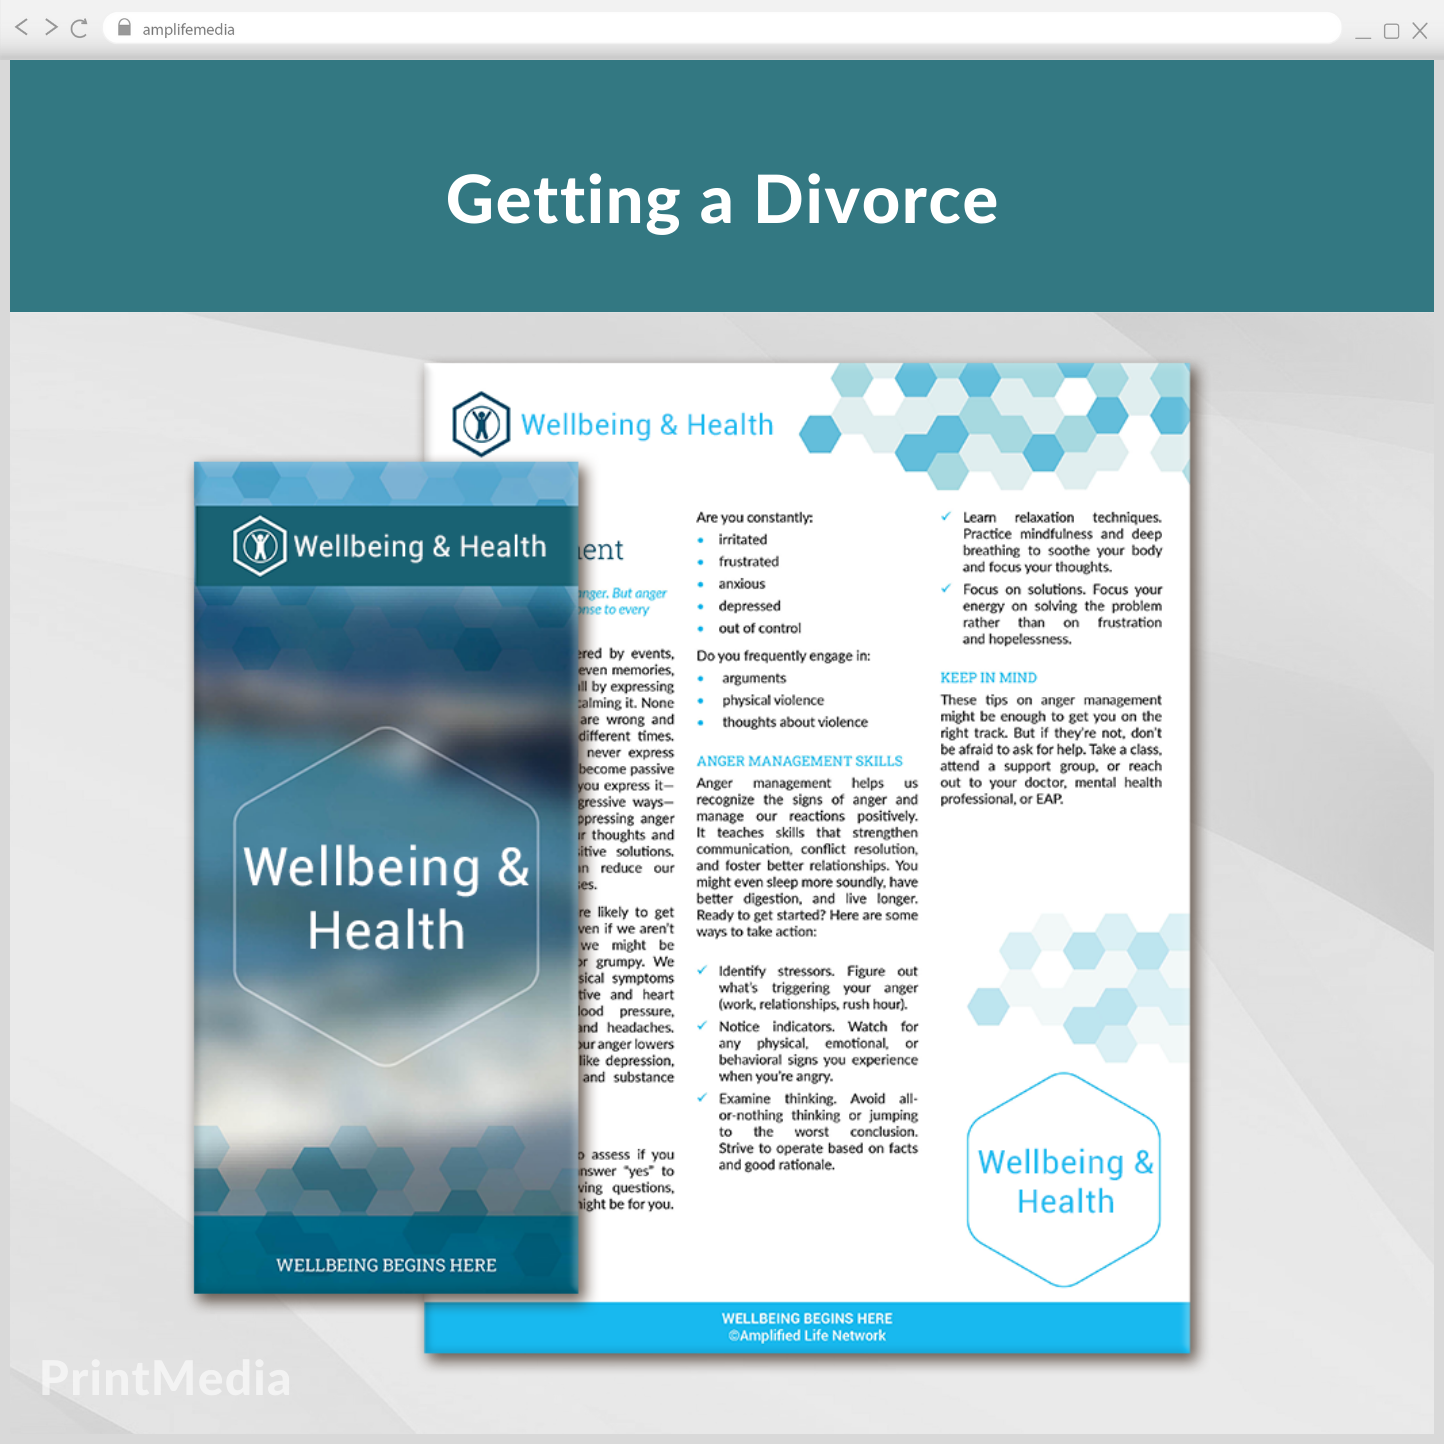 Subscription to Wellbeing Media: Getting a Divorce PrintMedia 122